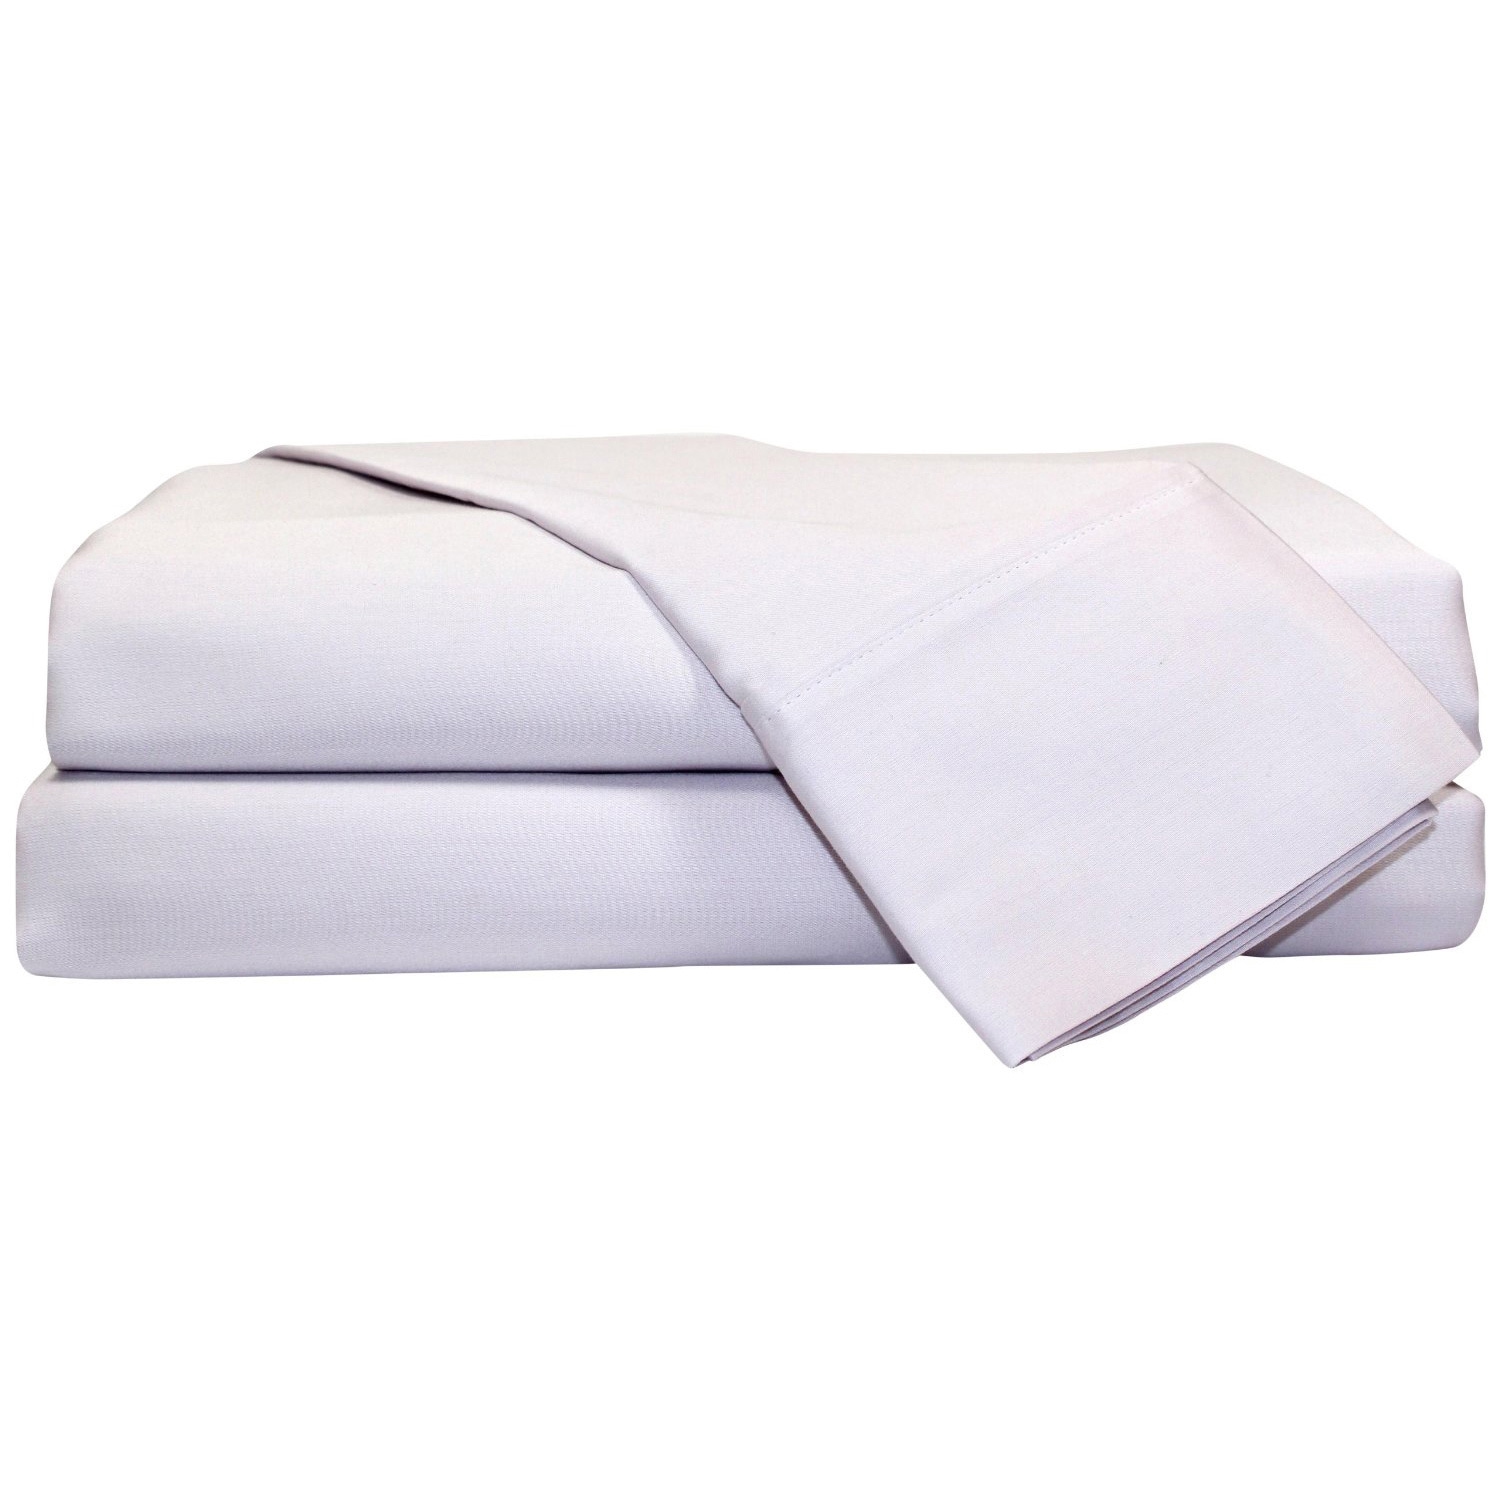 Hn International Hotel Concepts 400 Thread Count Solid Sateen Sheet Set White Size King